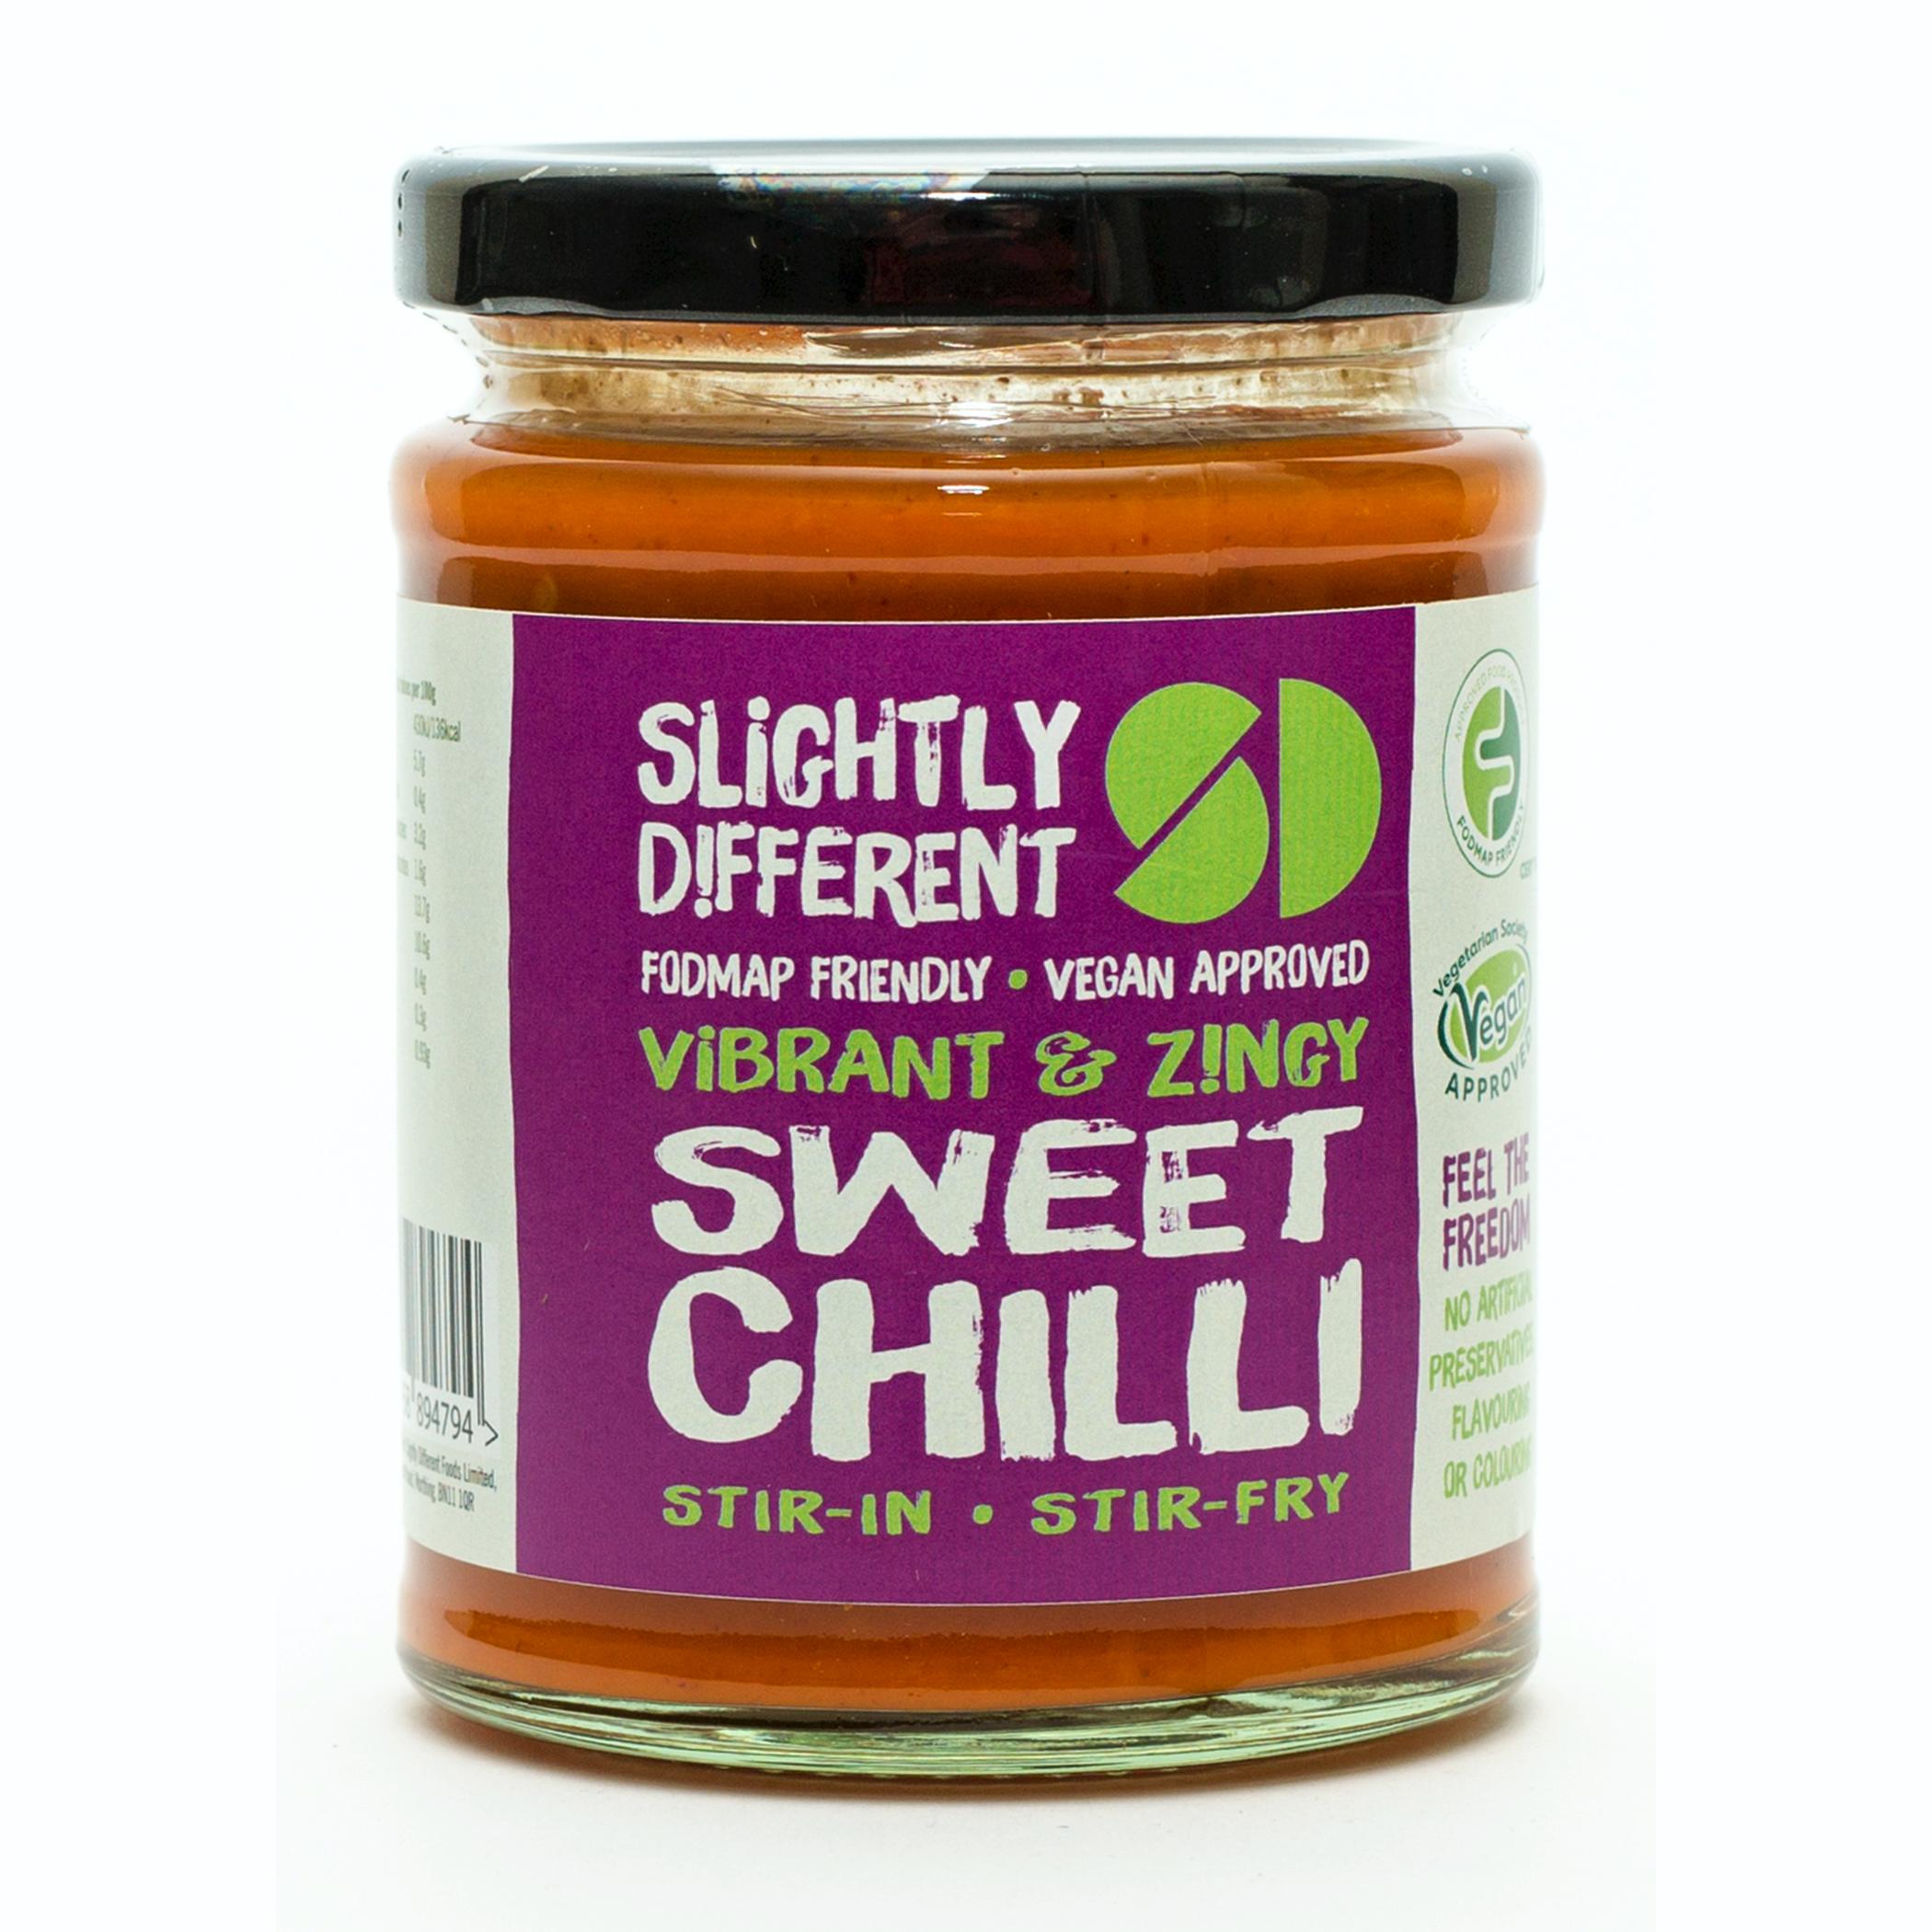 A jar of Slightly Different's Sweet Chilli Sauce